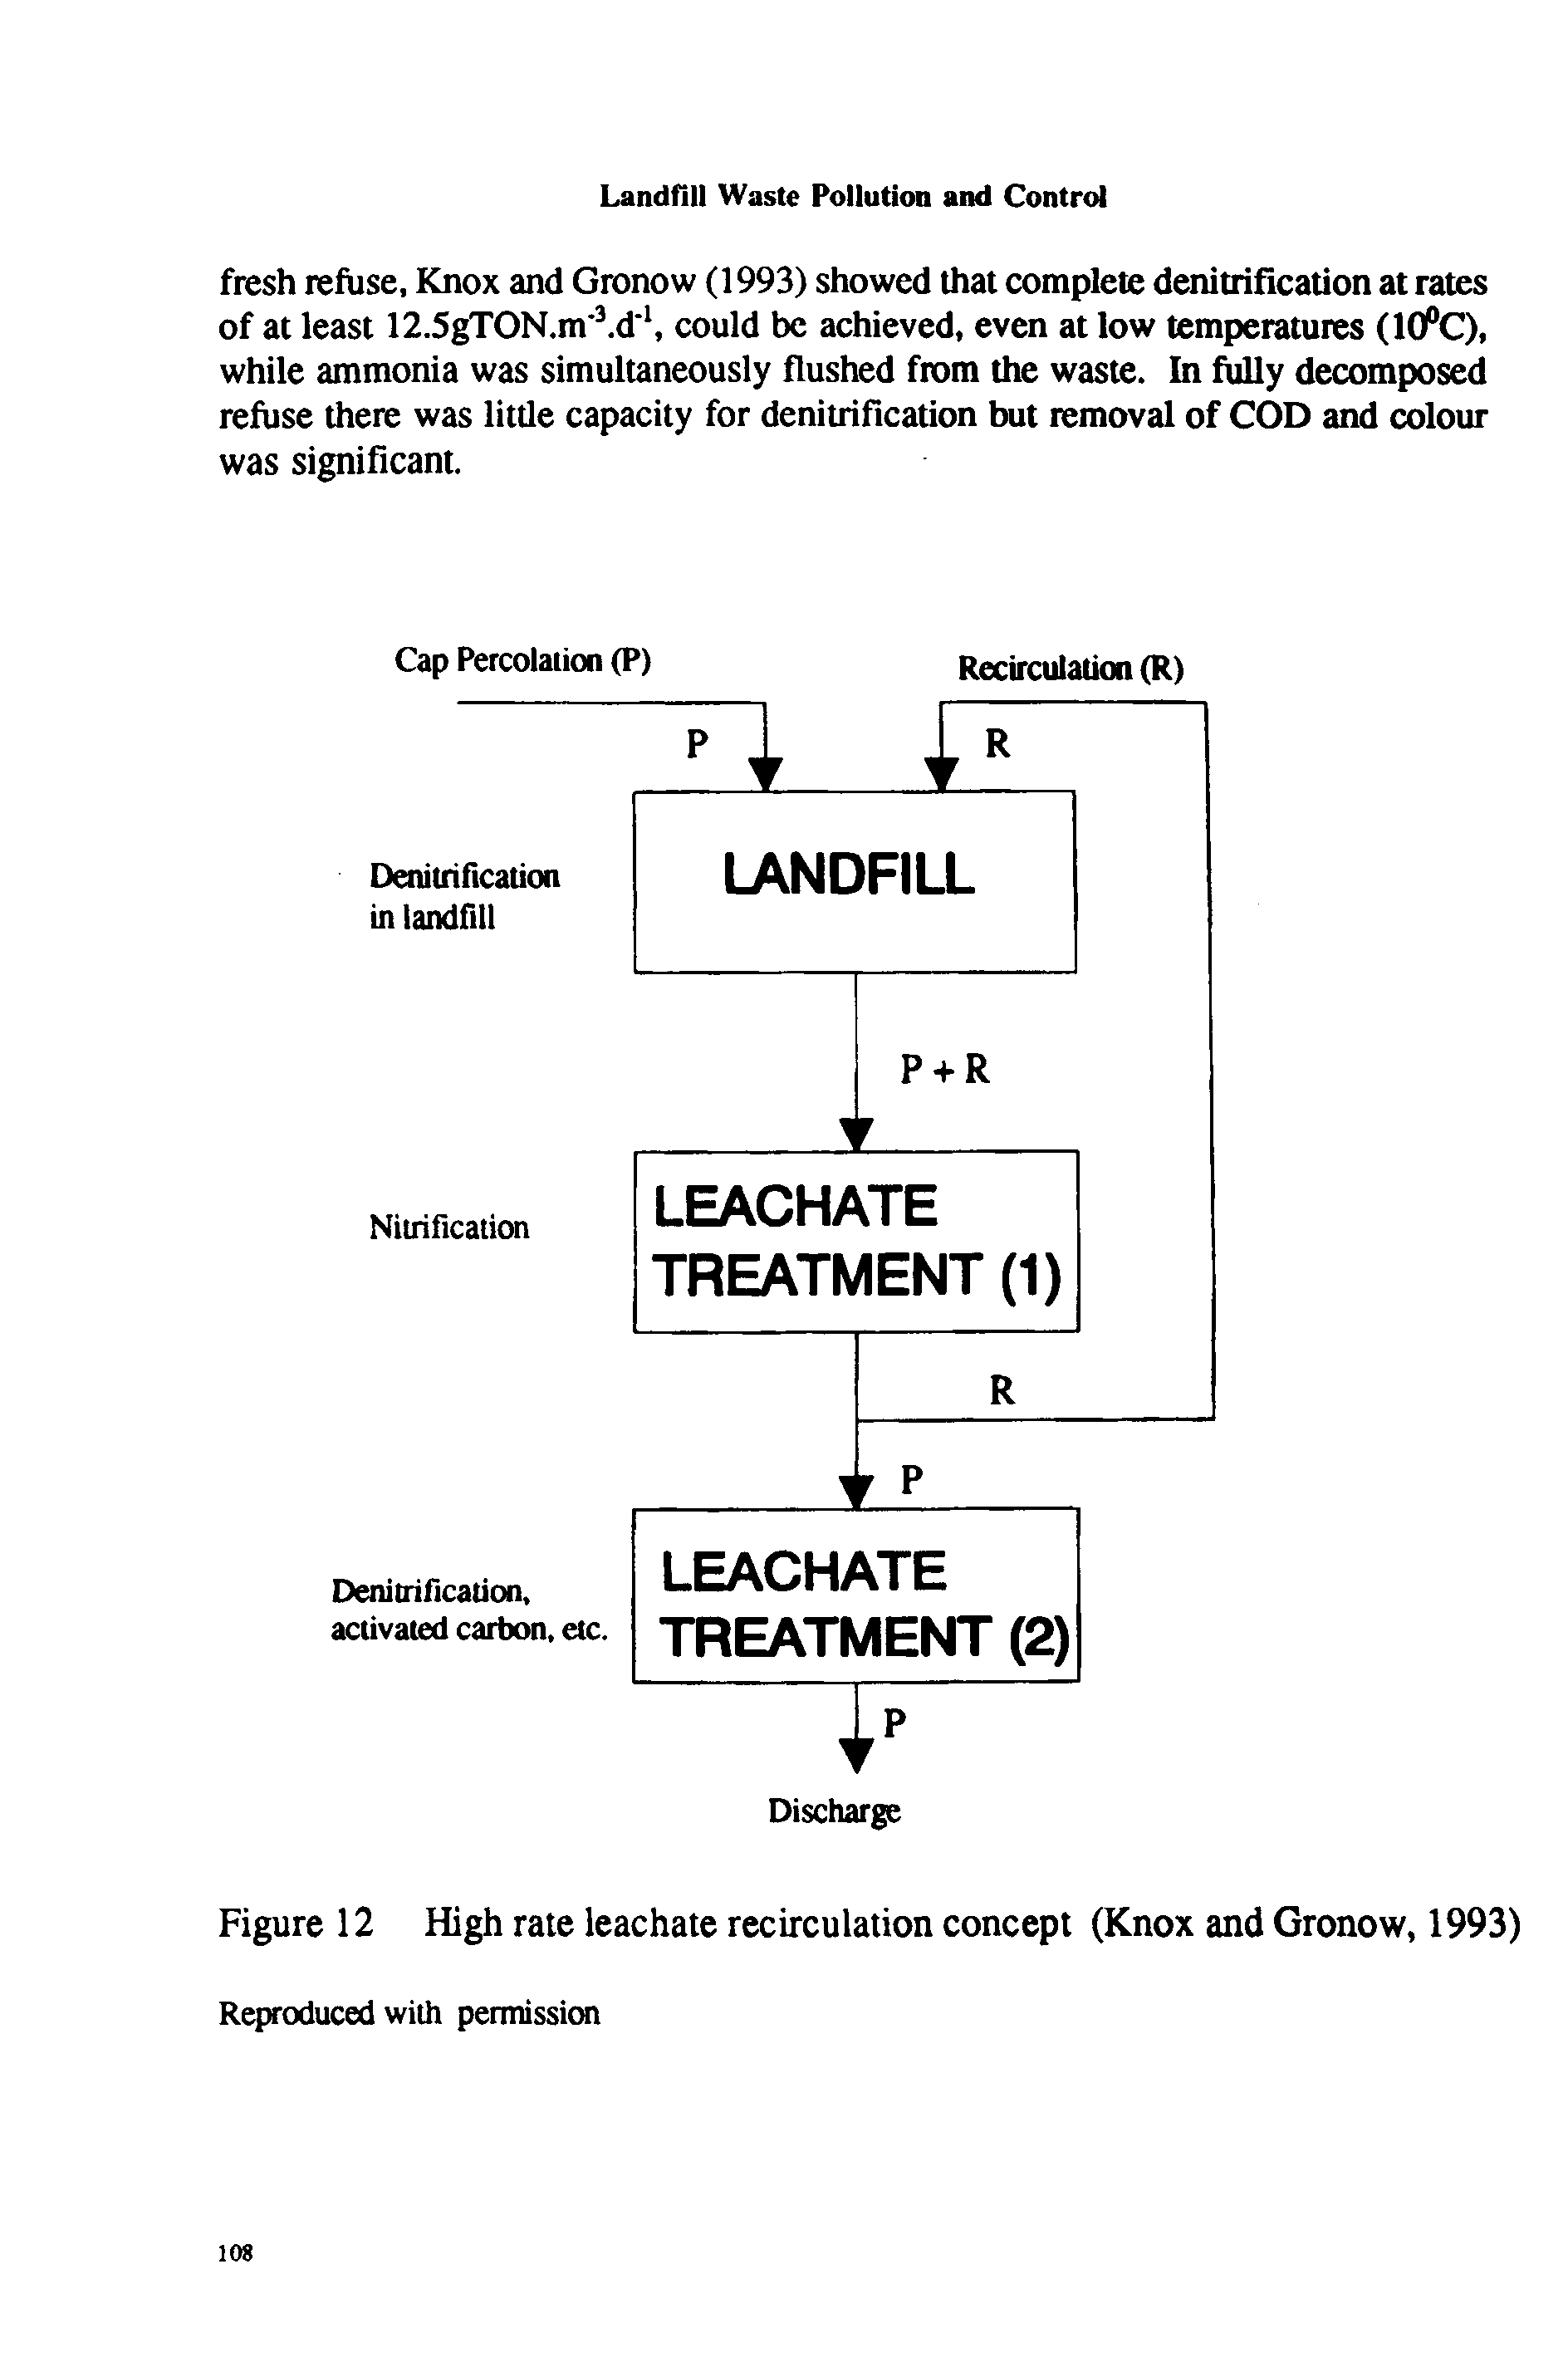 Figure 12 High rate leachate recirculation concept (Knox and Gronow, 1993) Reproduced with permission...